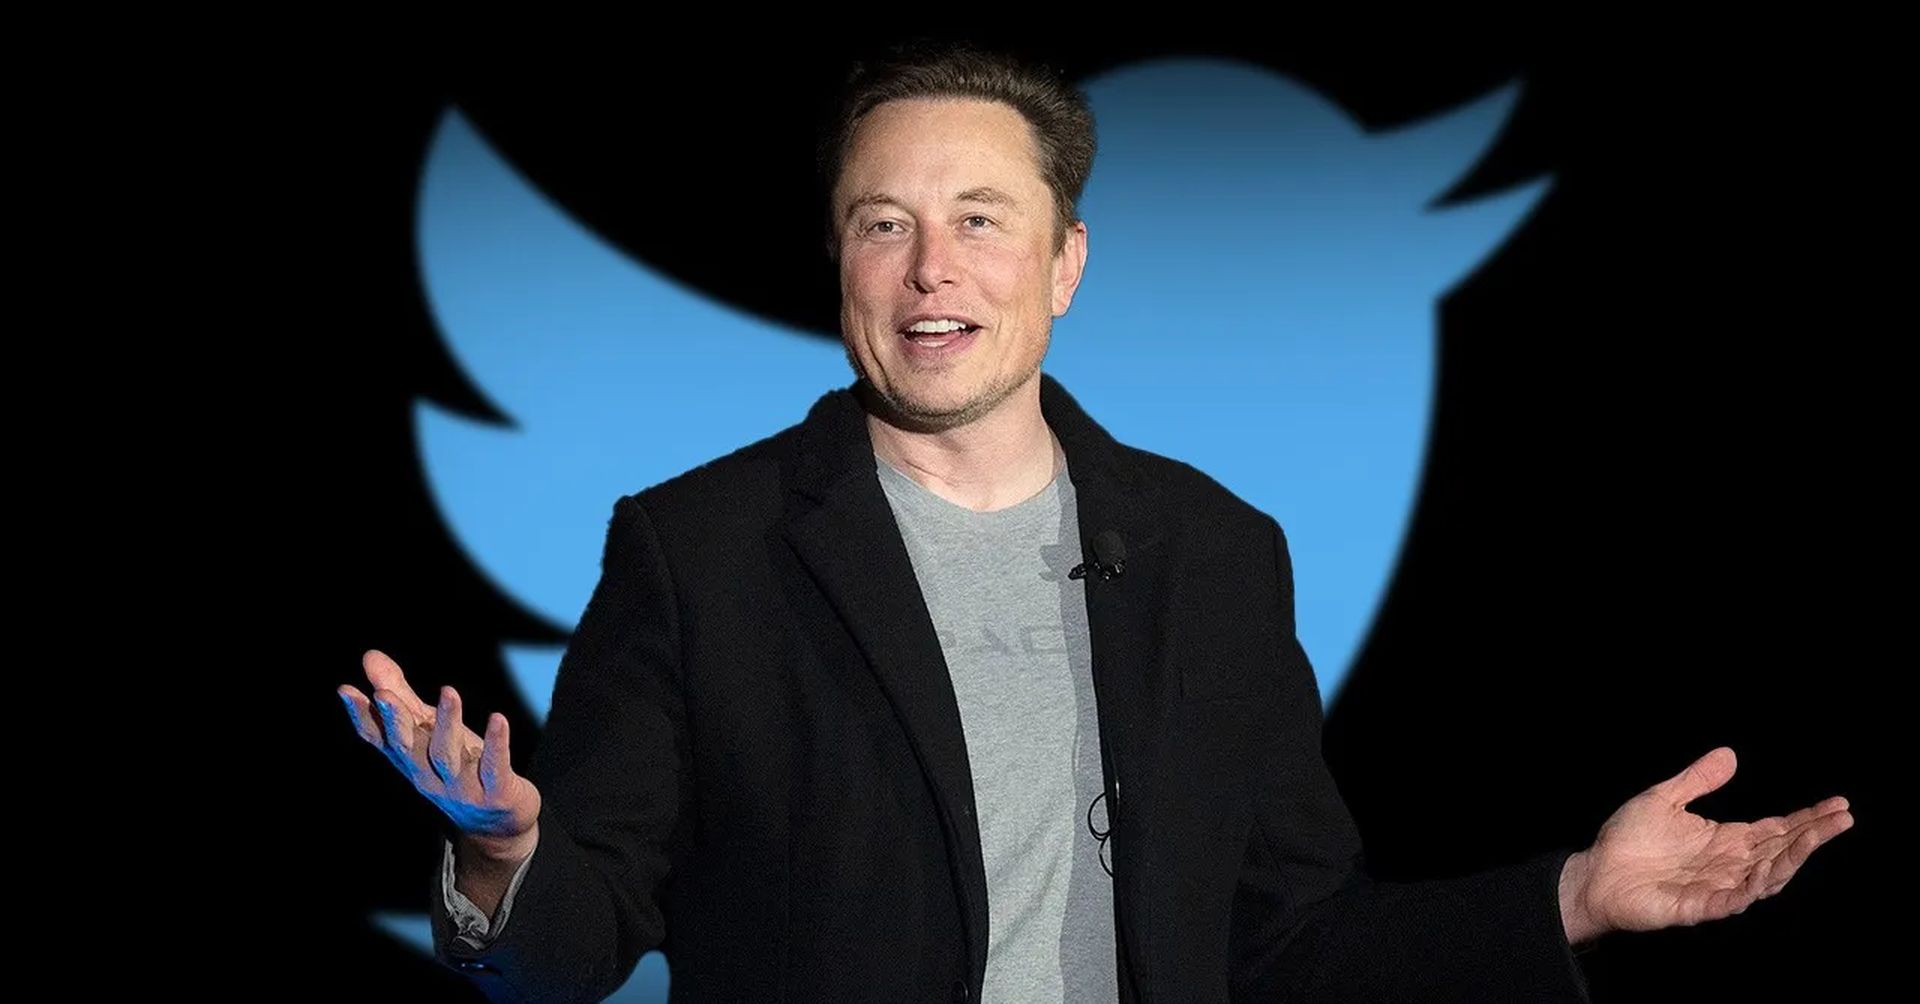 Elon Musk says Twitter interfered in elections and that "Twitter 2.0 will be far more effective, transparent and even-handed," while replying on a thread...